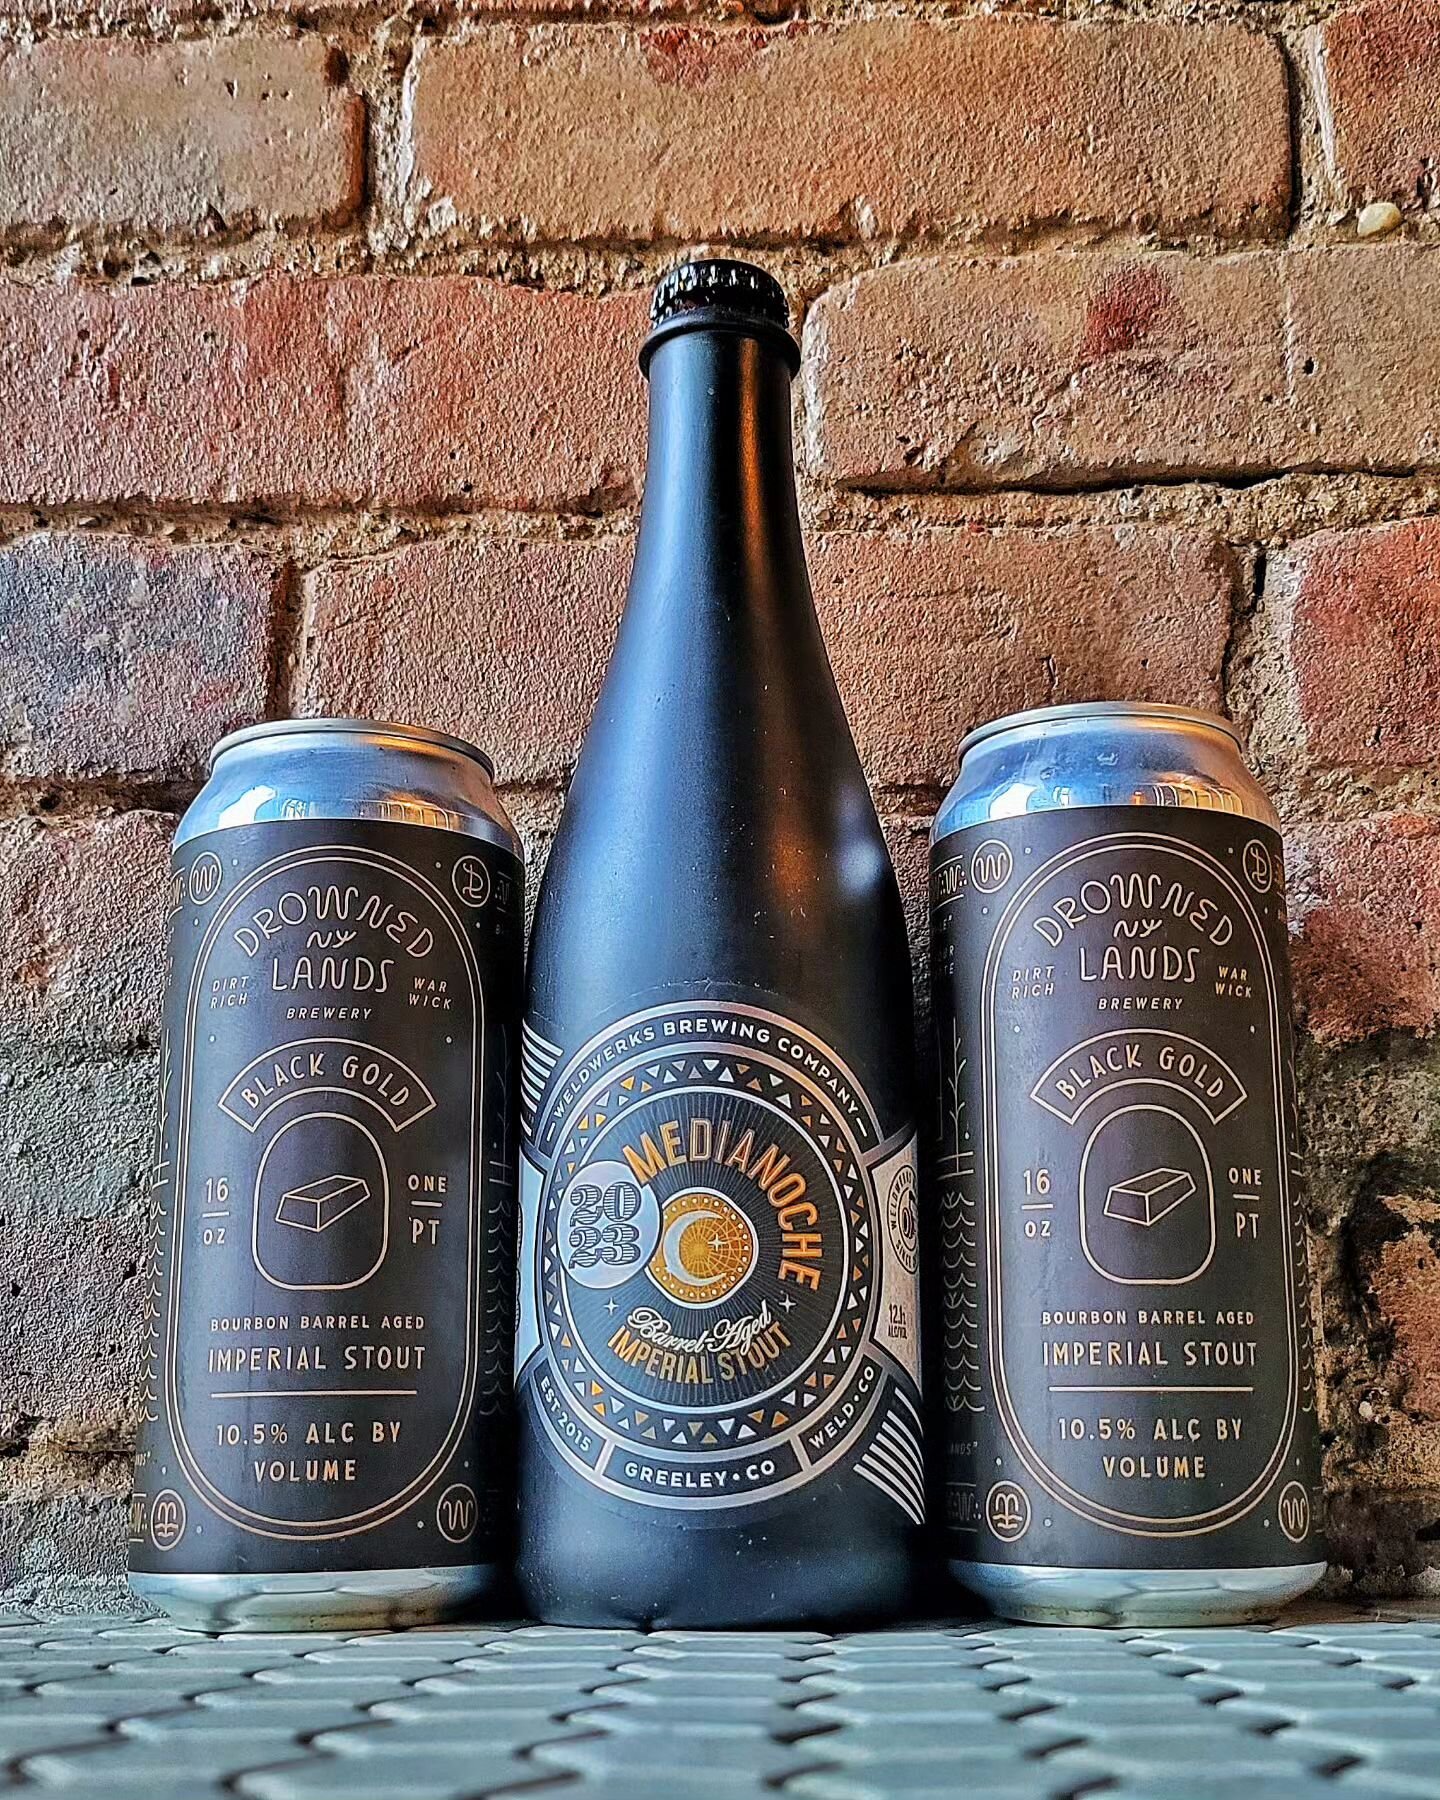 Added to Queue:

Two big and boozy barrel-aged imperial stouts to look forward to, from breweries both near and far. Check them out below👇👇👇

&quot;Black Gold&quot;
@drownedlandsbrewery
BBA Imperial Stout (10.5%)

Brewed with a base malt of marrie